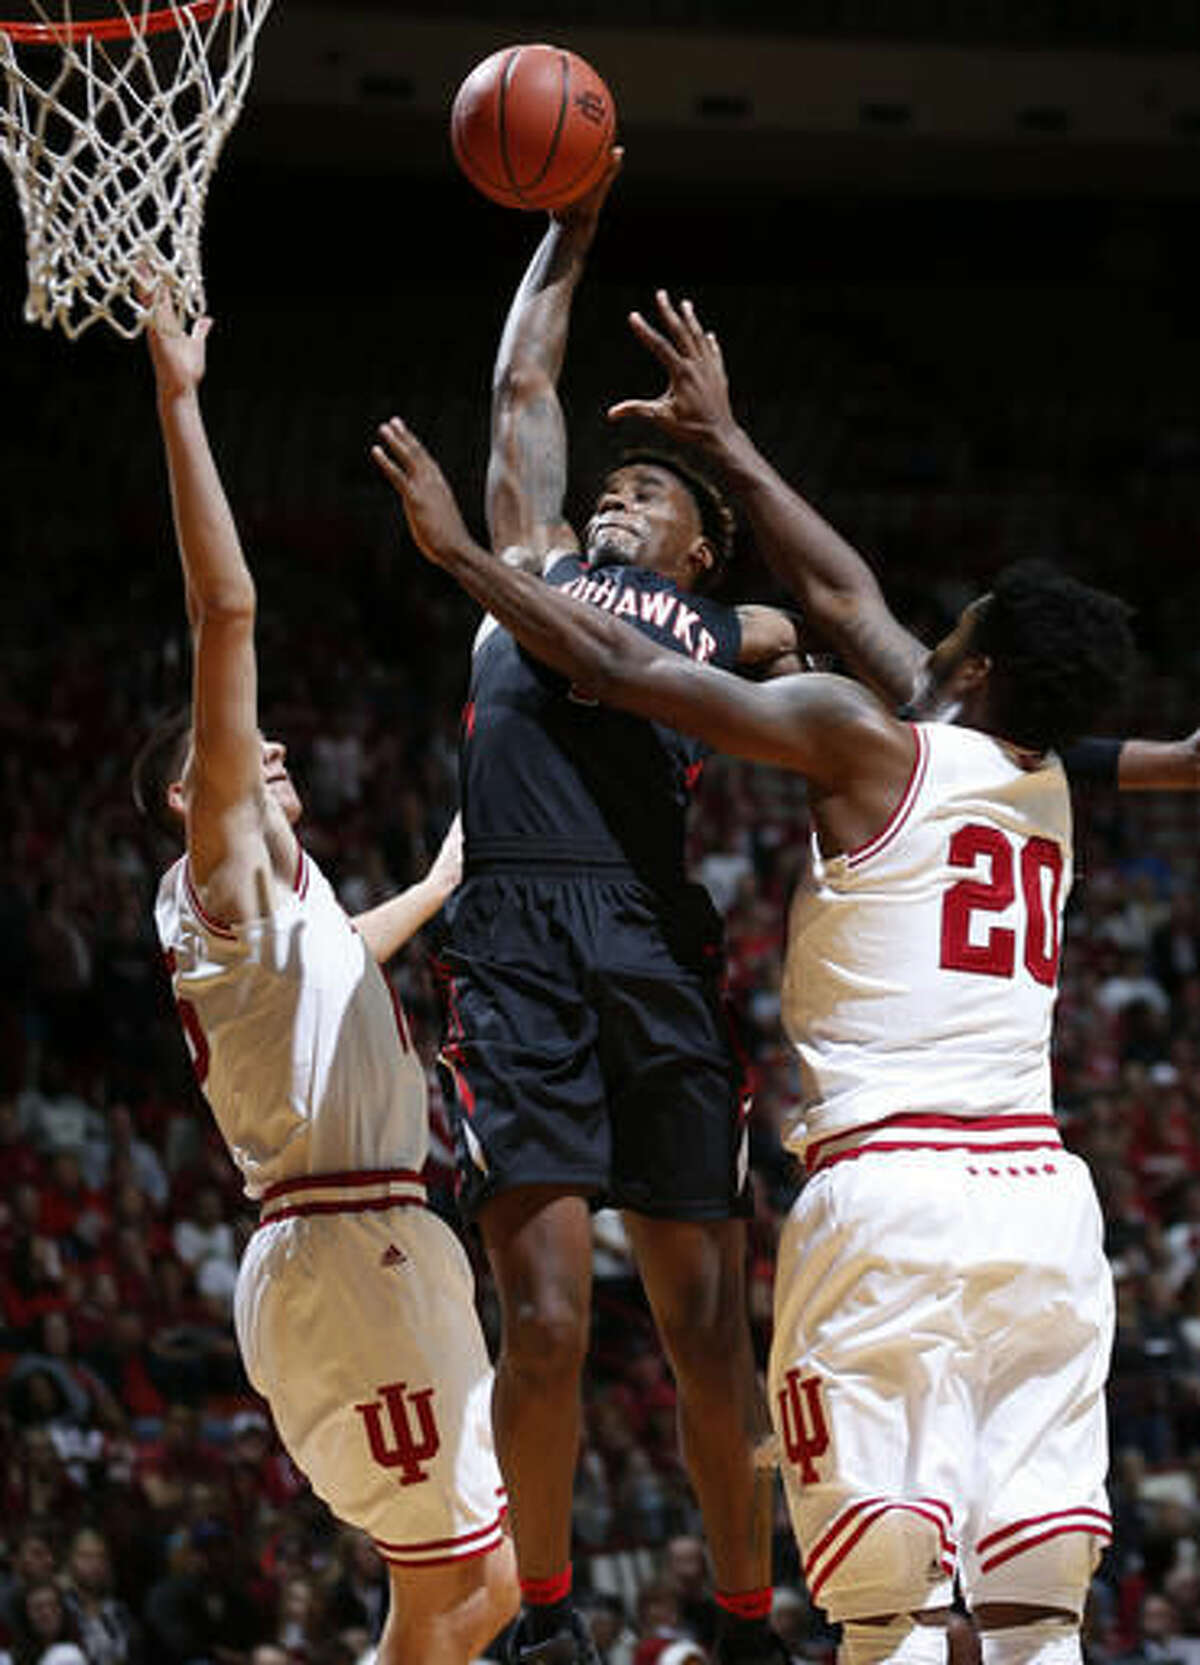 Southeast Missouri guard Antonius Cleveland, center, dunks between Indiana defenders Zach McRoberts, left, and De'Ron Davis in the first half of an NCAA college basketball game in Bloomington, Ind., Sunday, Dec. 4, 2016. (AP Photo/AJ Mast)